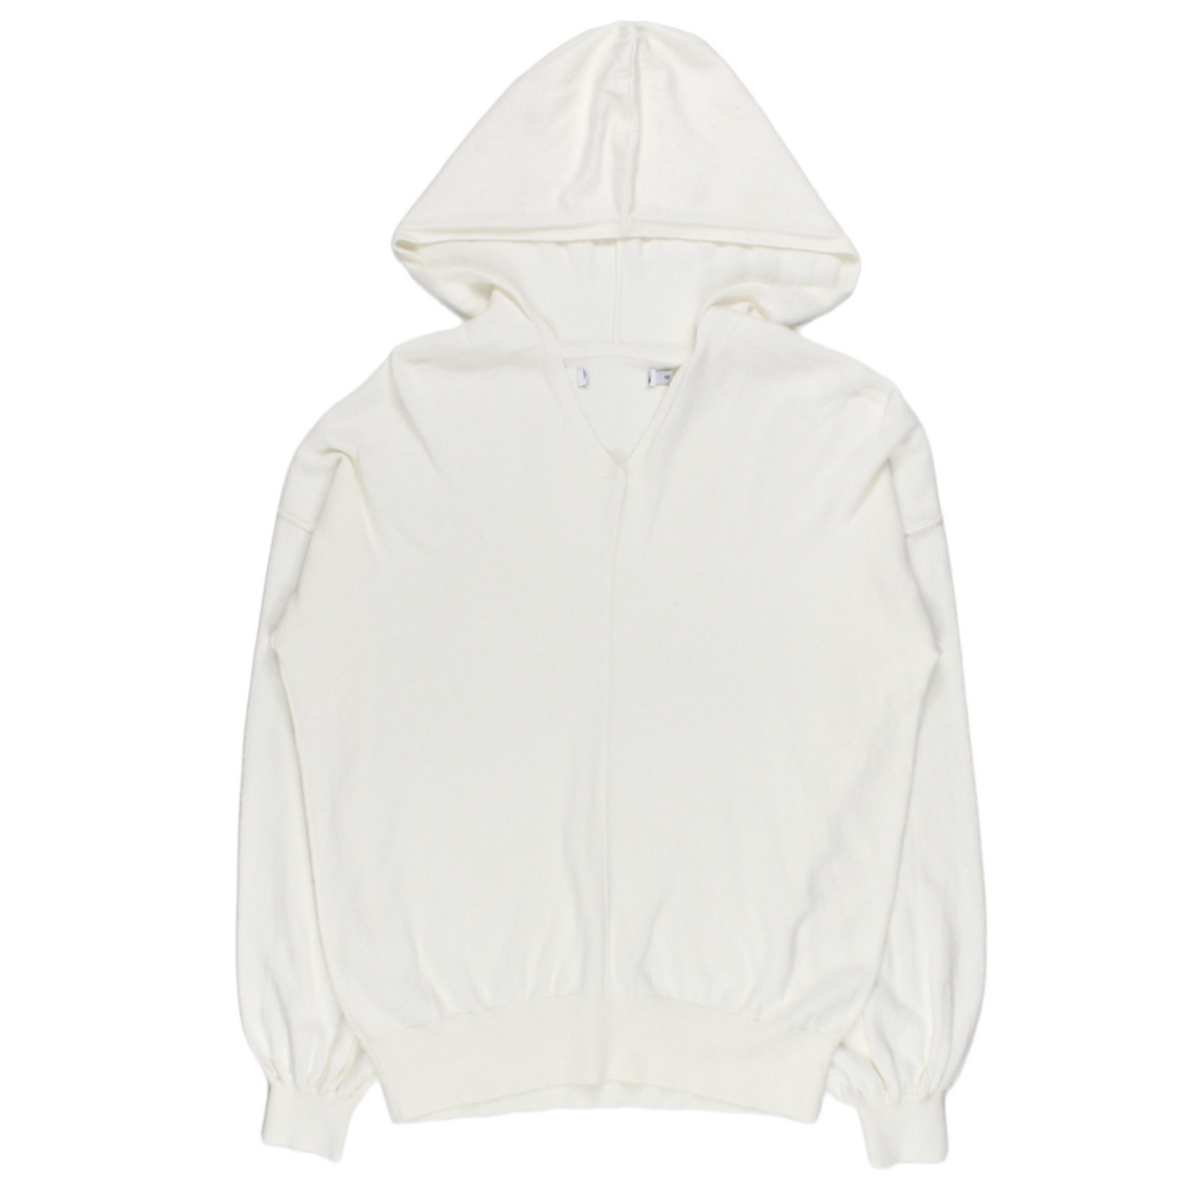 NRBY Cream Cashmere Blend Hoodie - Sample